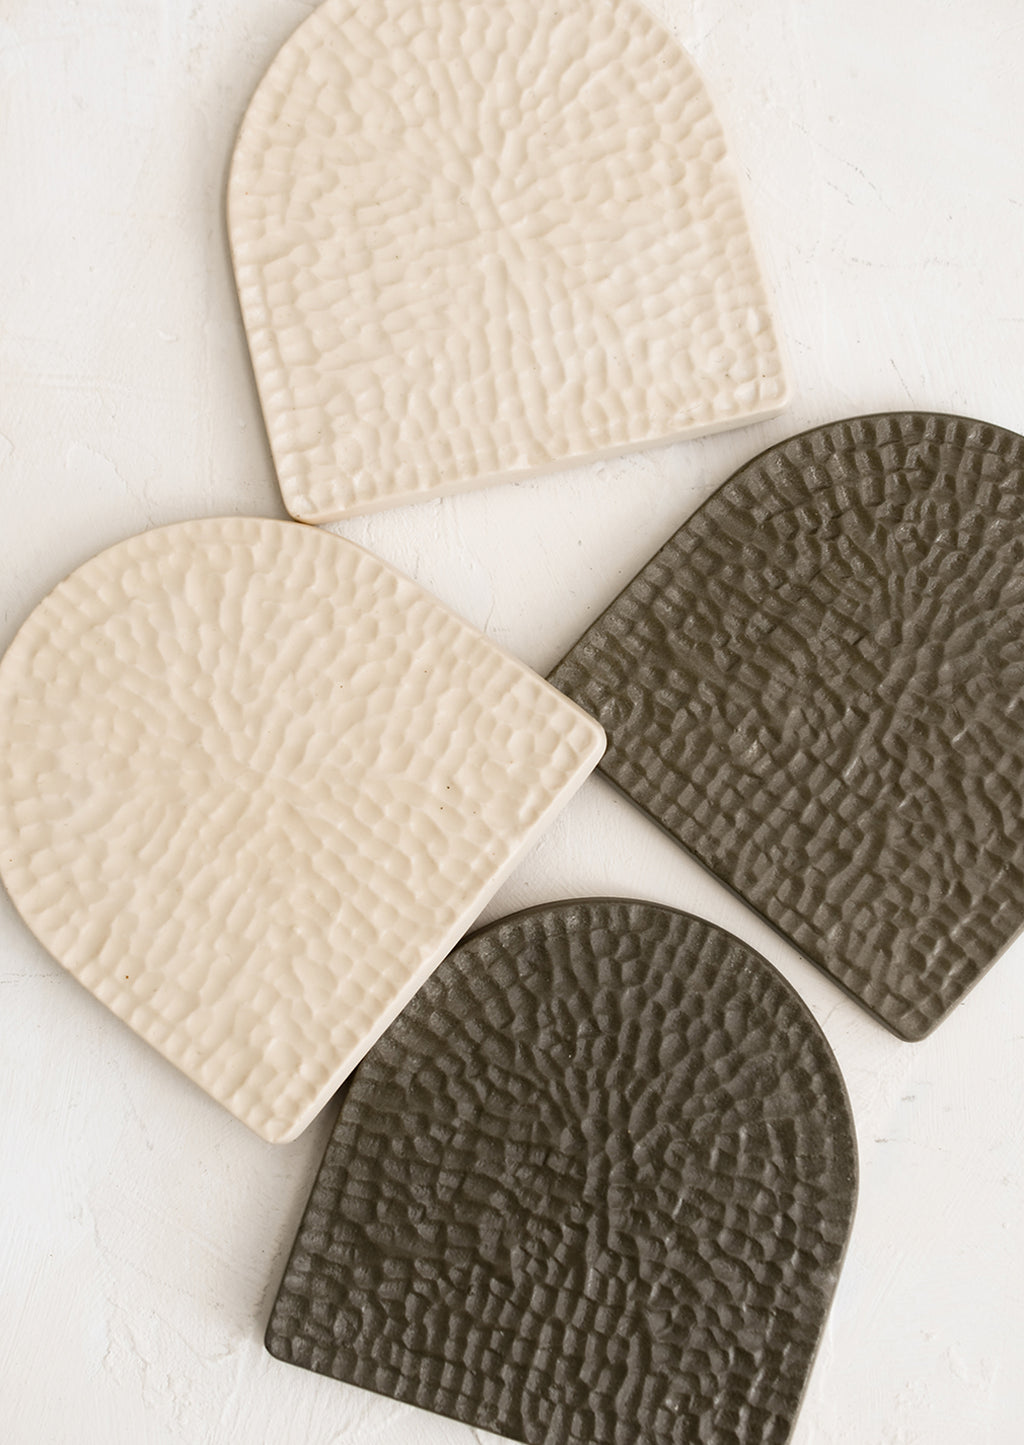 1: Textured, arch-shaped coasters in two colors.